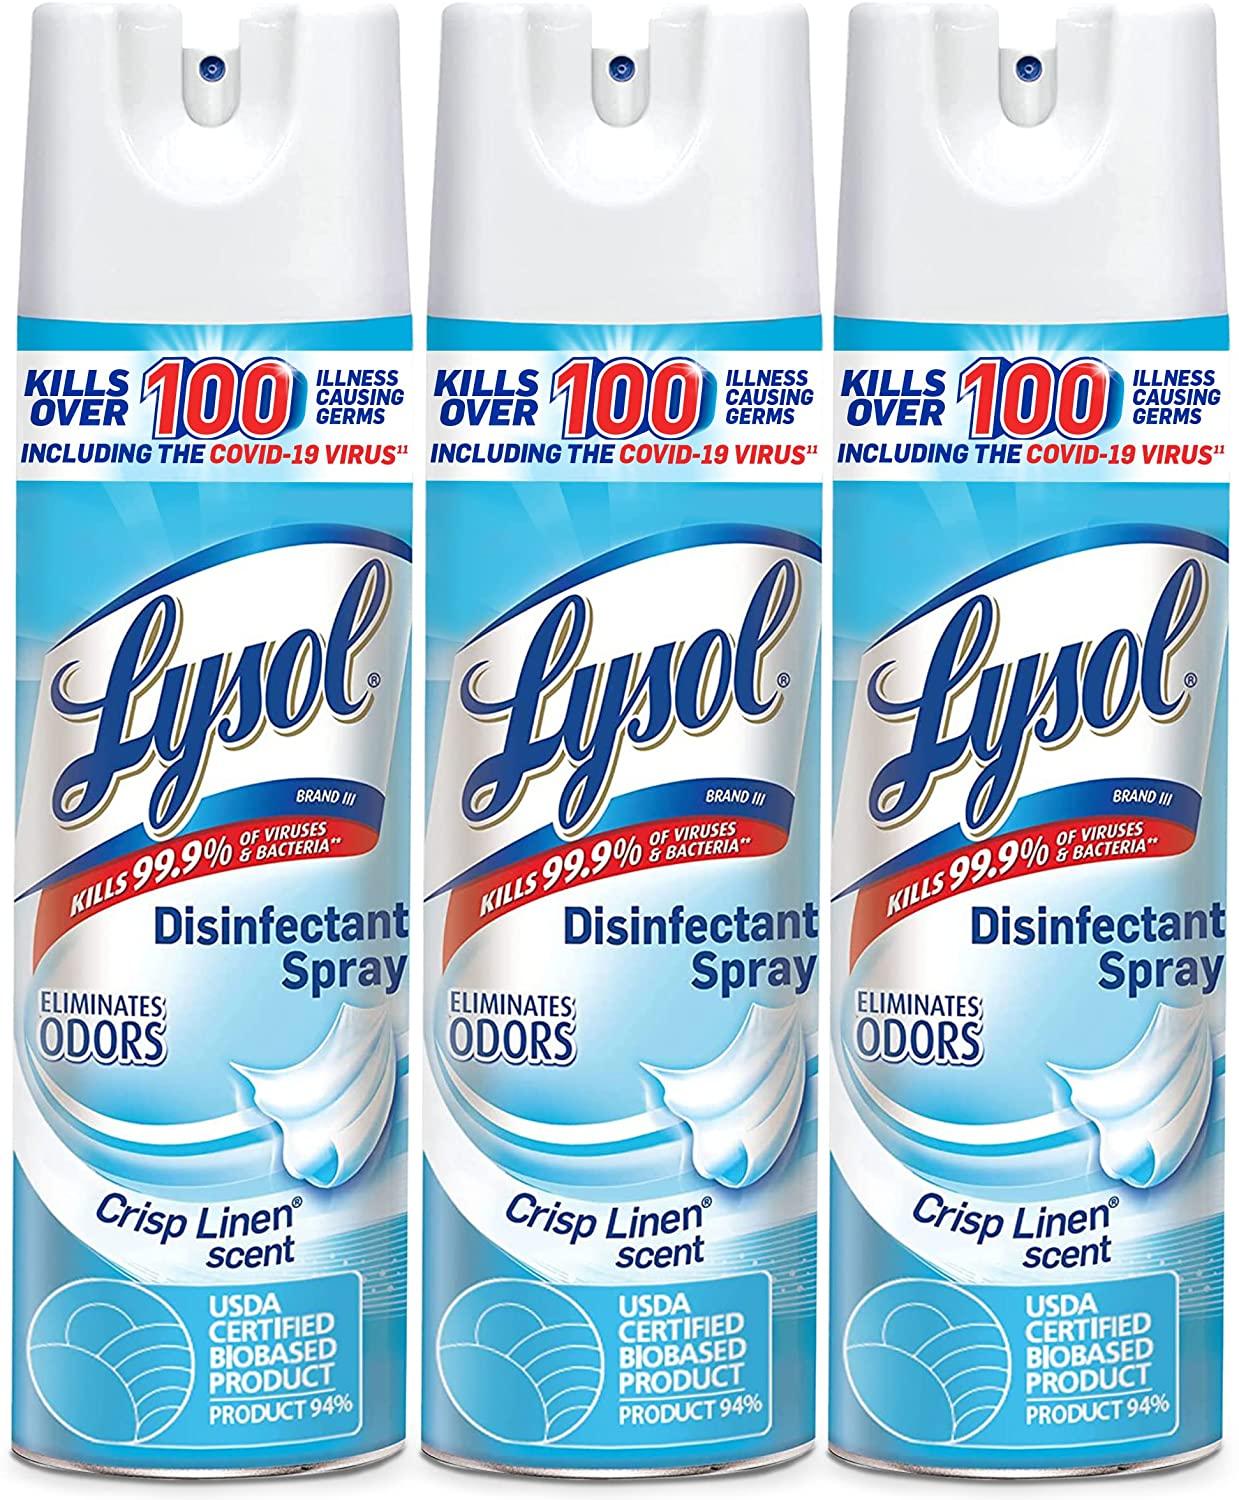 Lysol Disinfectant Spray, Sanitizing and Antibacterial Spray, For Disinfecting and Deodorizing, Early Morning Breeze, 3 Count, 19 fl oz each